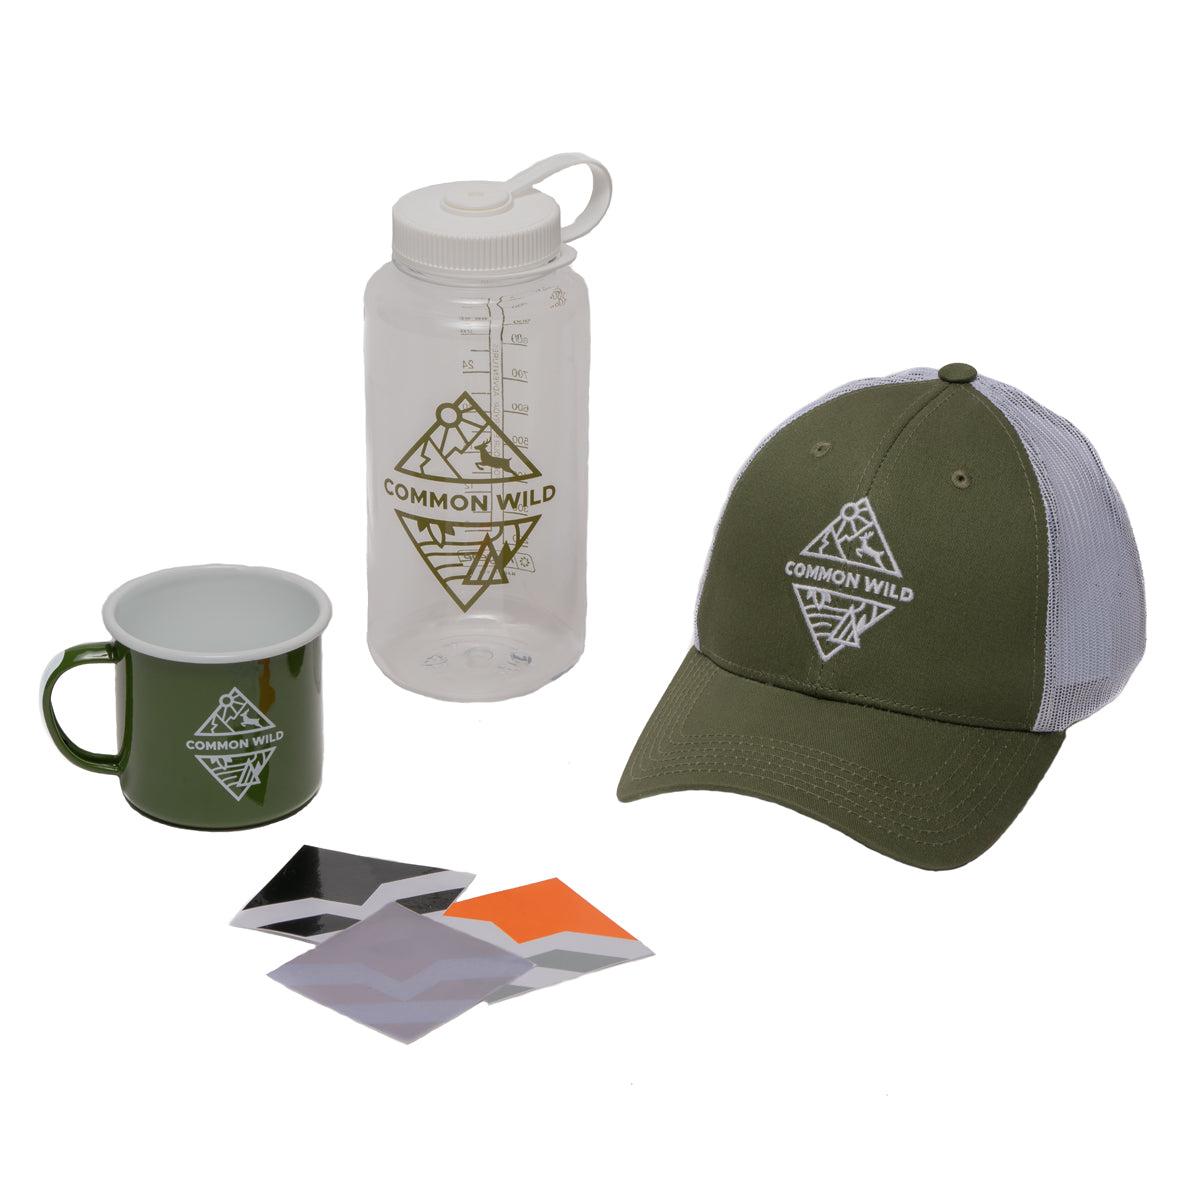 Common Wild Swag Pack